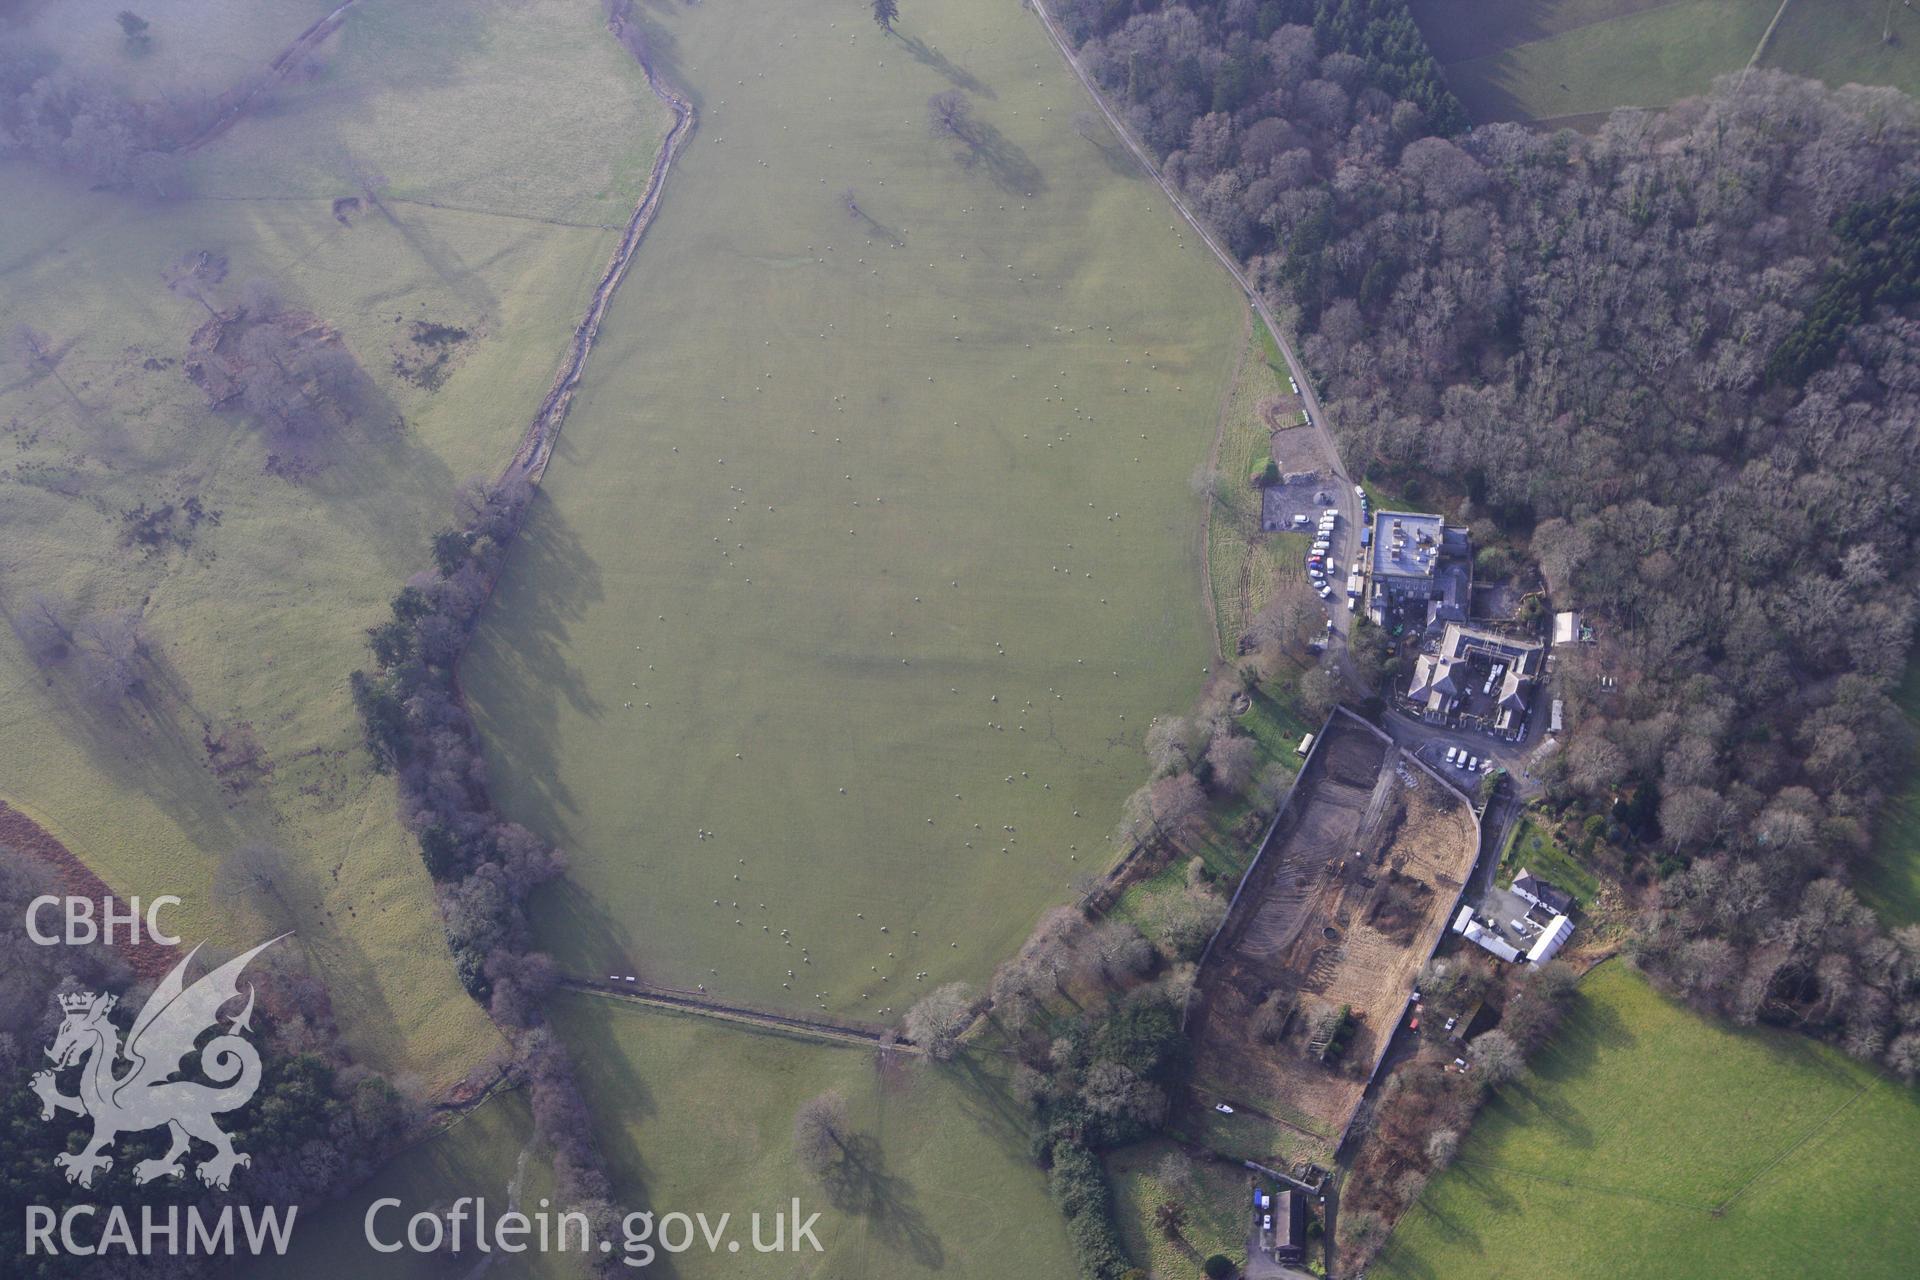 RCAHMW colour oblique photograph of Nanteos Mansion, with earthworks in parkland. Taken by Toby Driver on 07/02/2012.